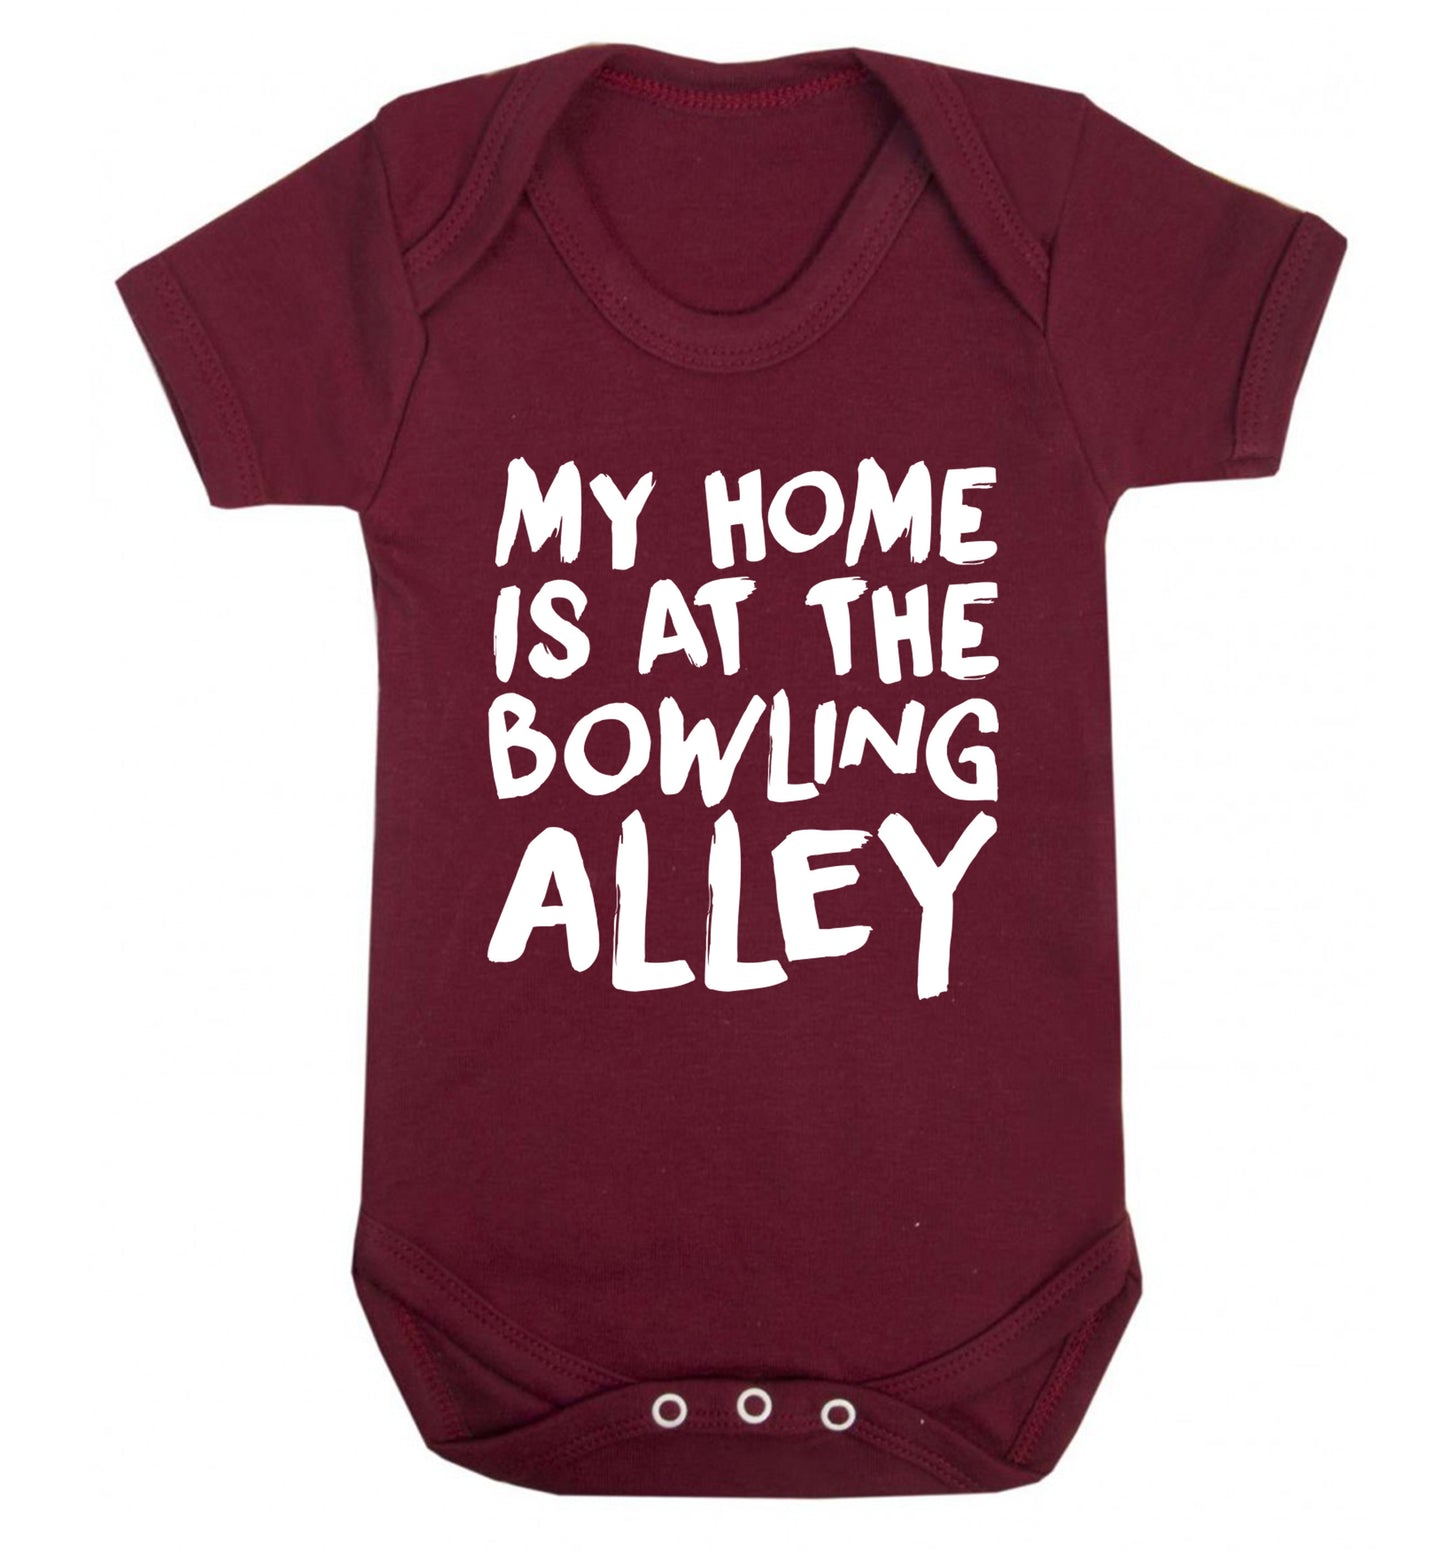 My home is at the bowling alley Baby Vest maroon 18-24 months